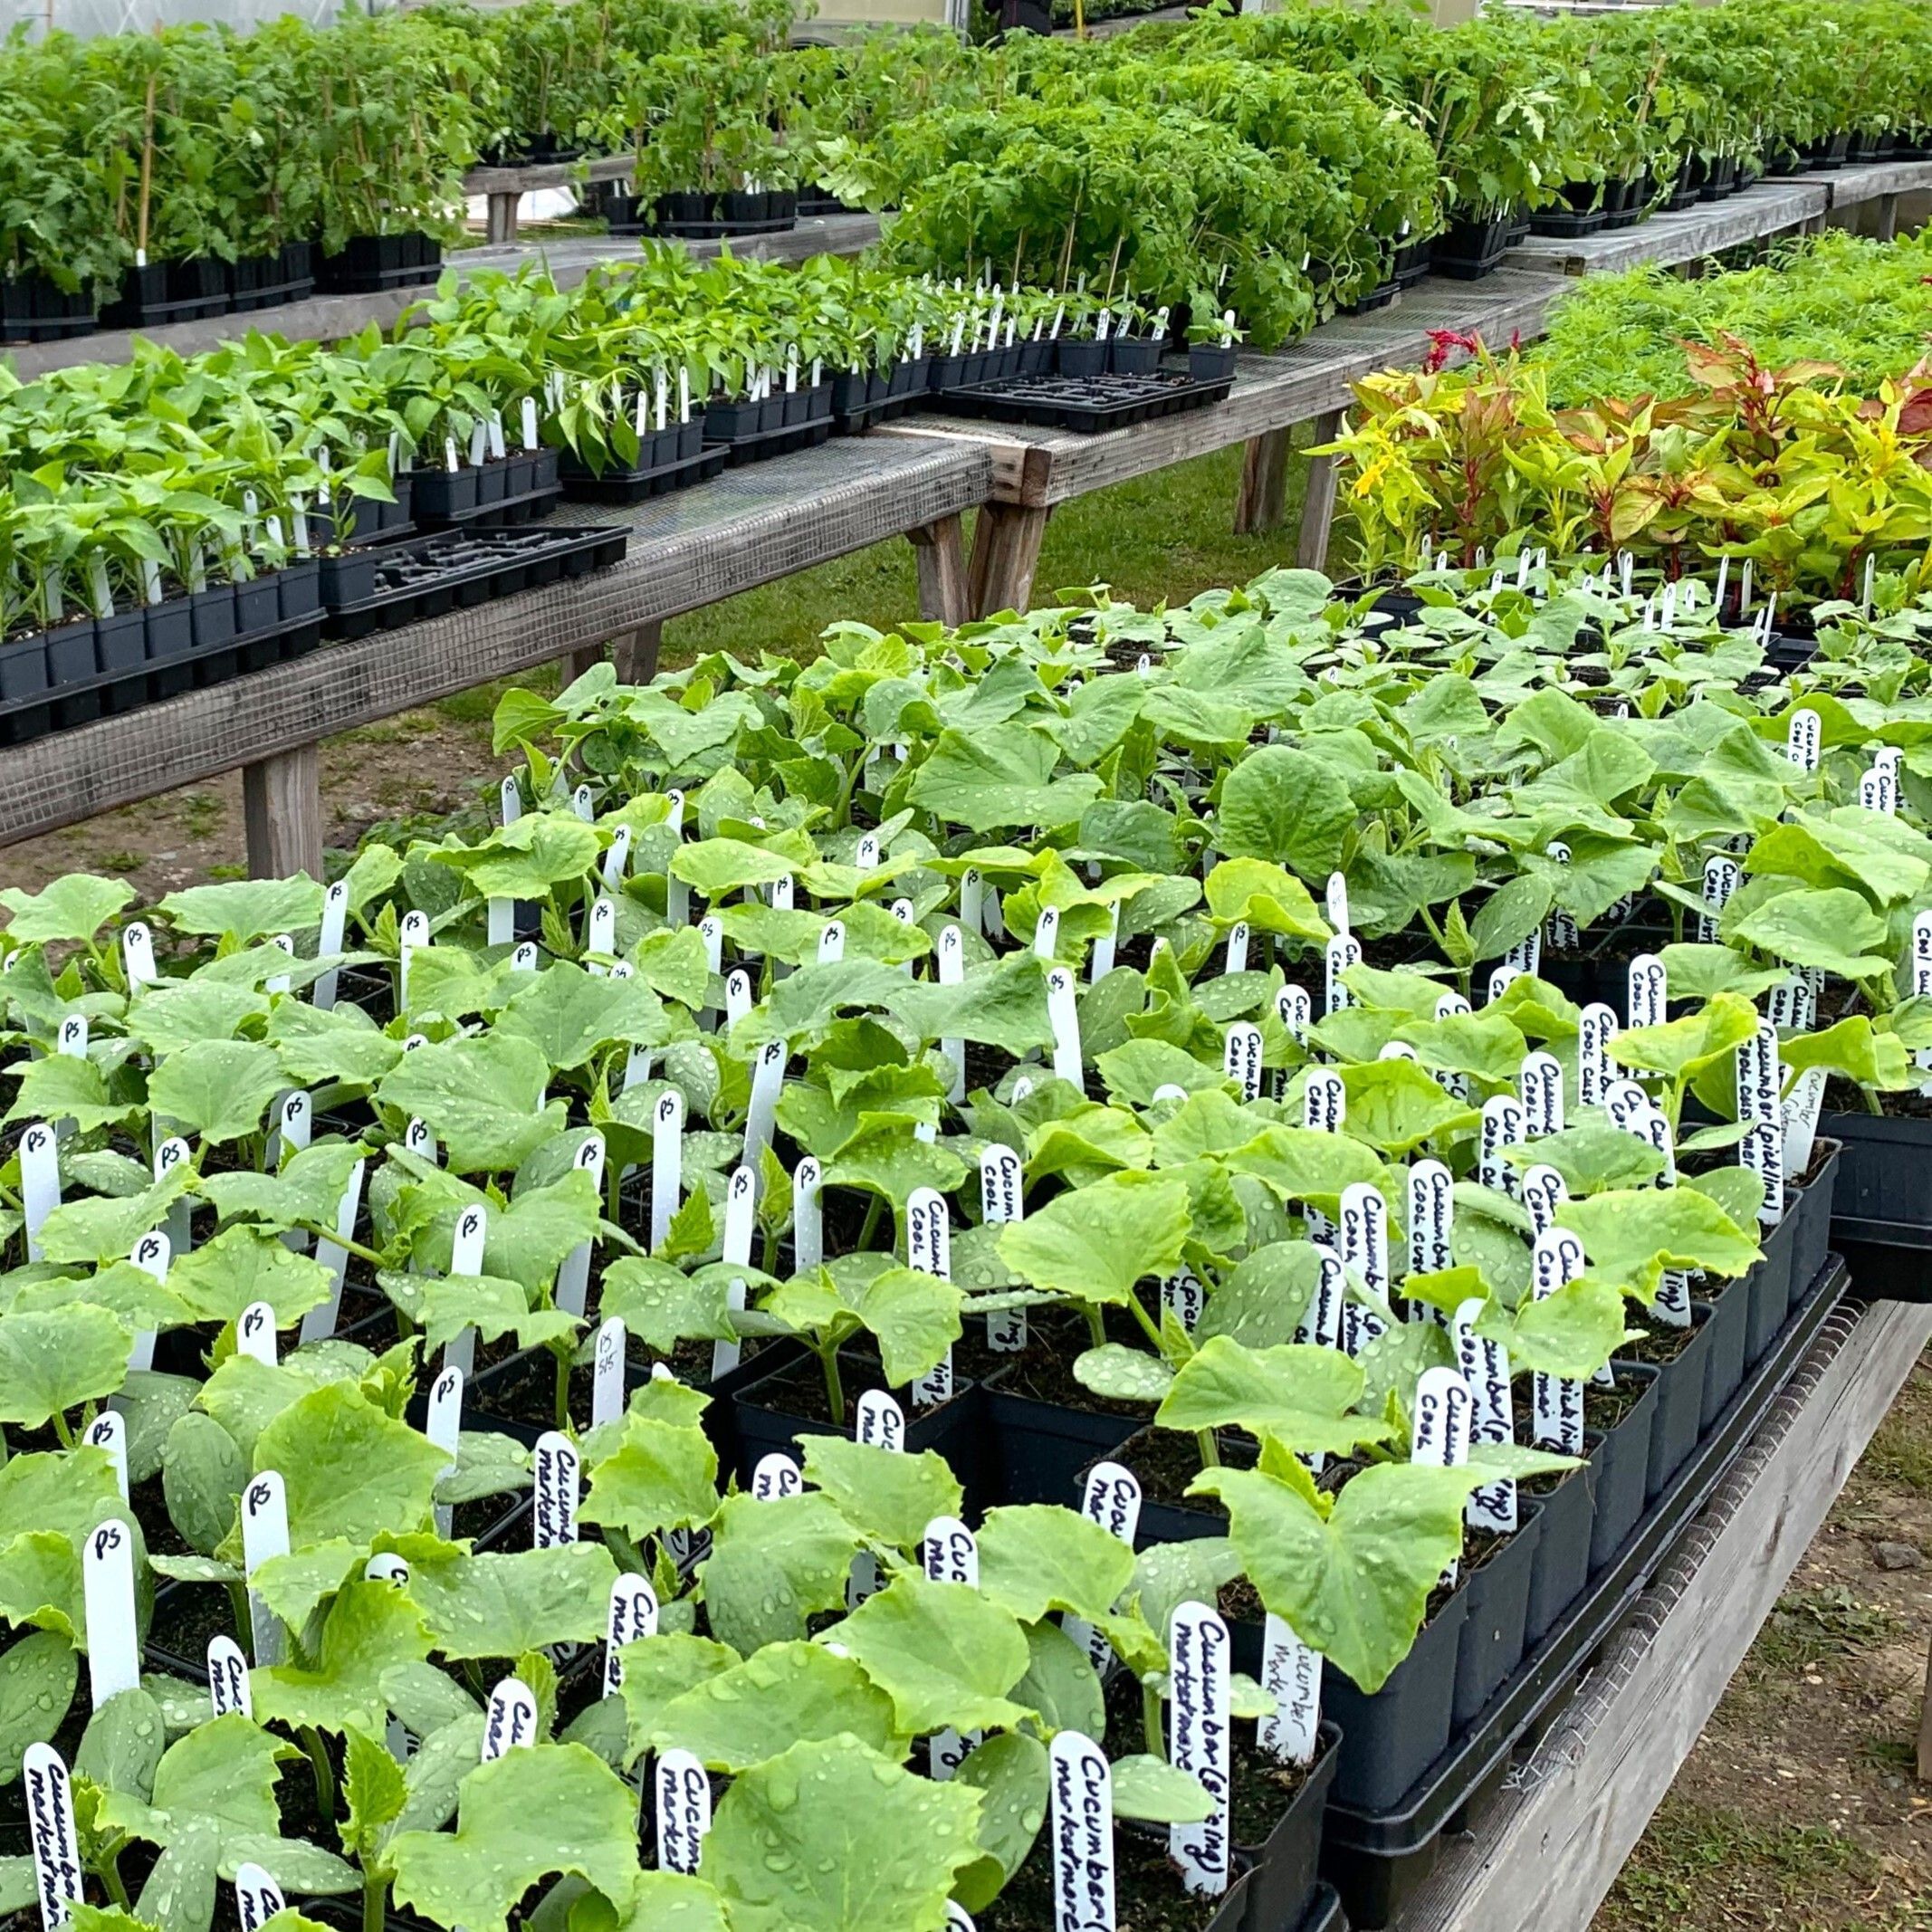 Spring Plant Sale is accepting orders